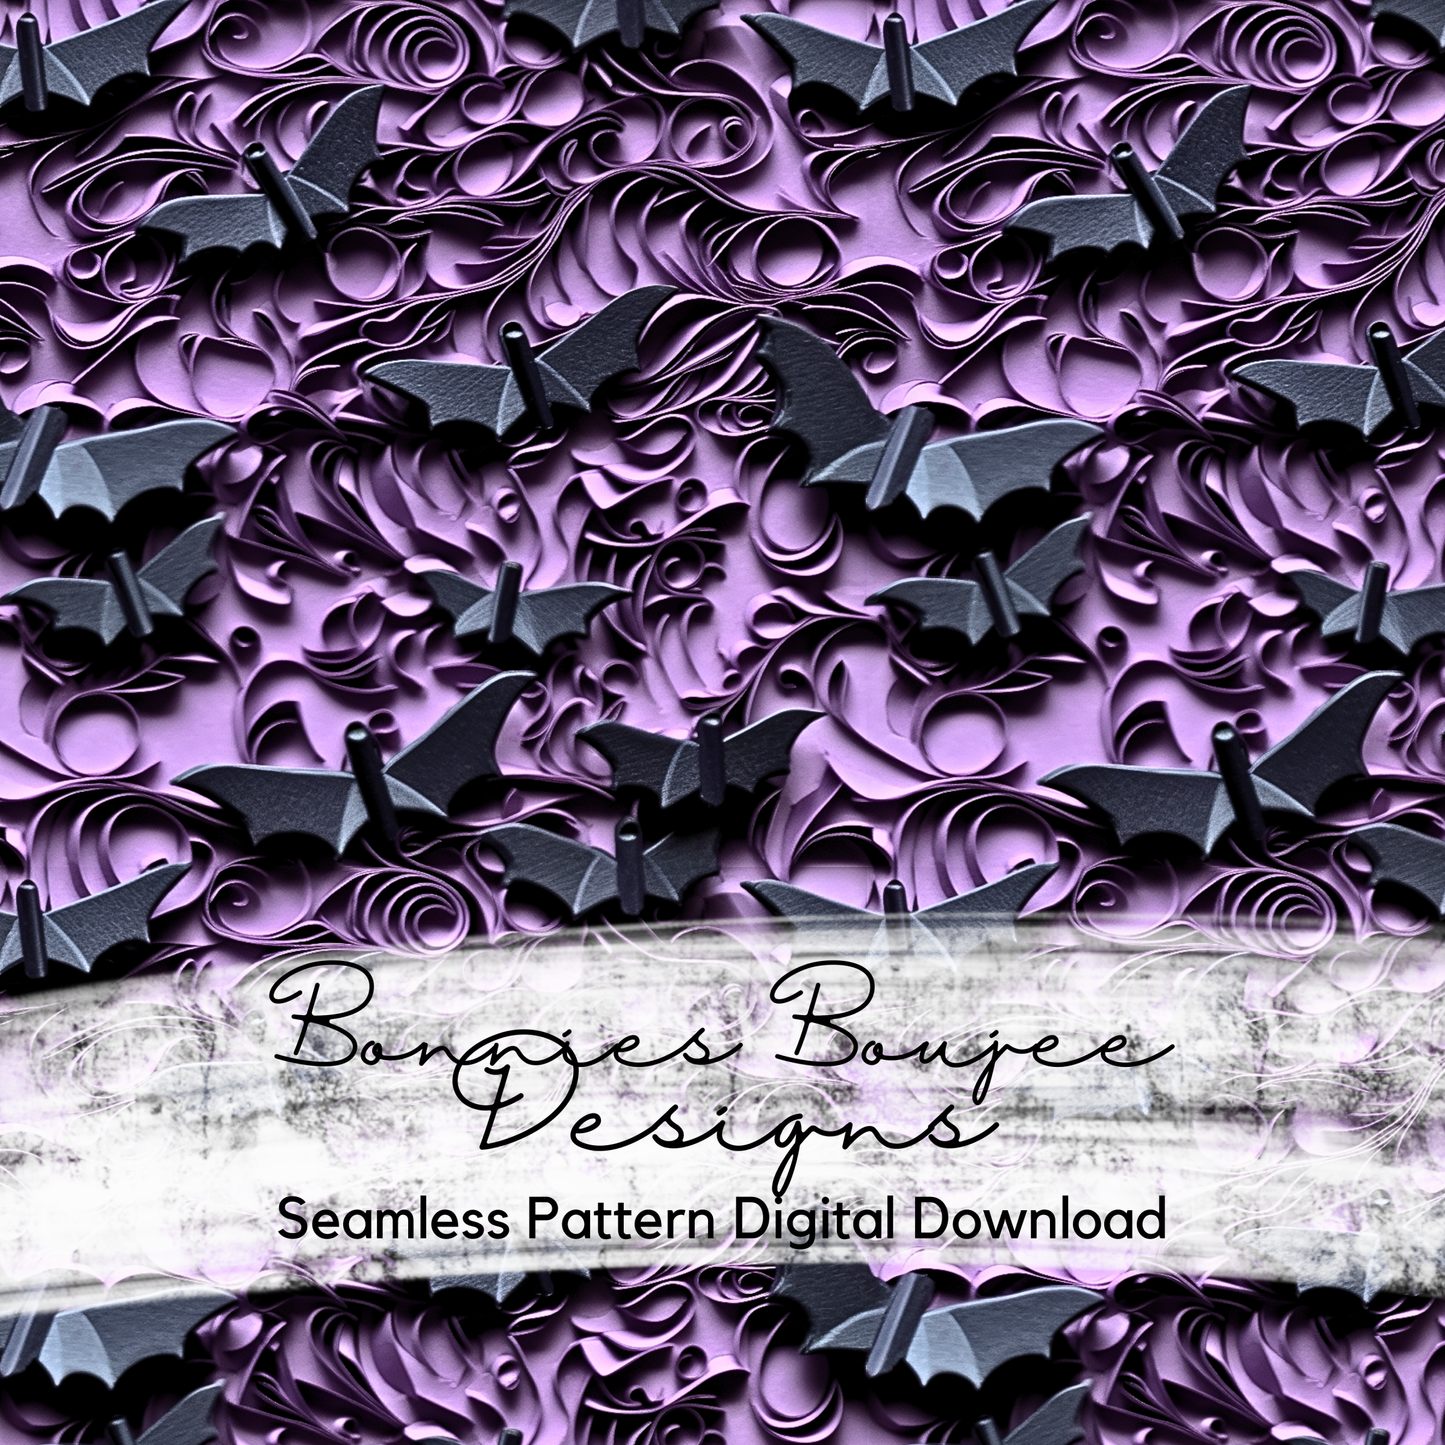 Paper Quilling of Bats on Purple Seamless Design